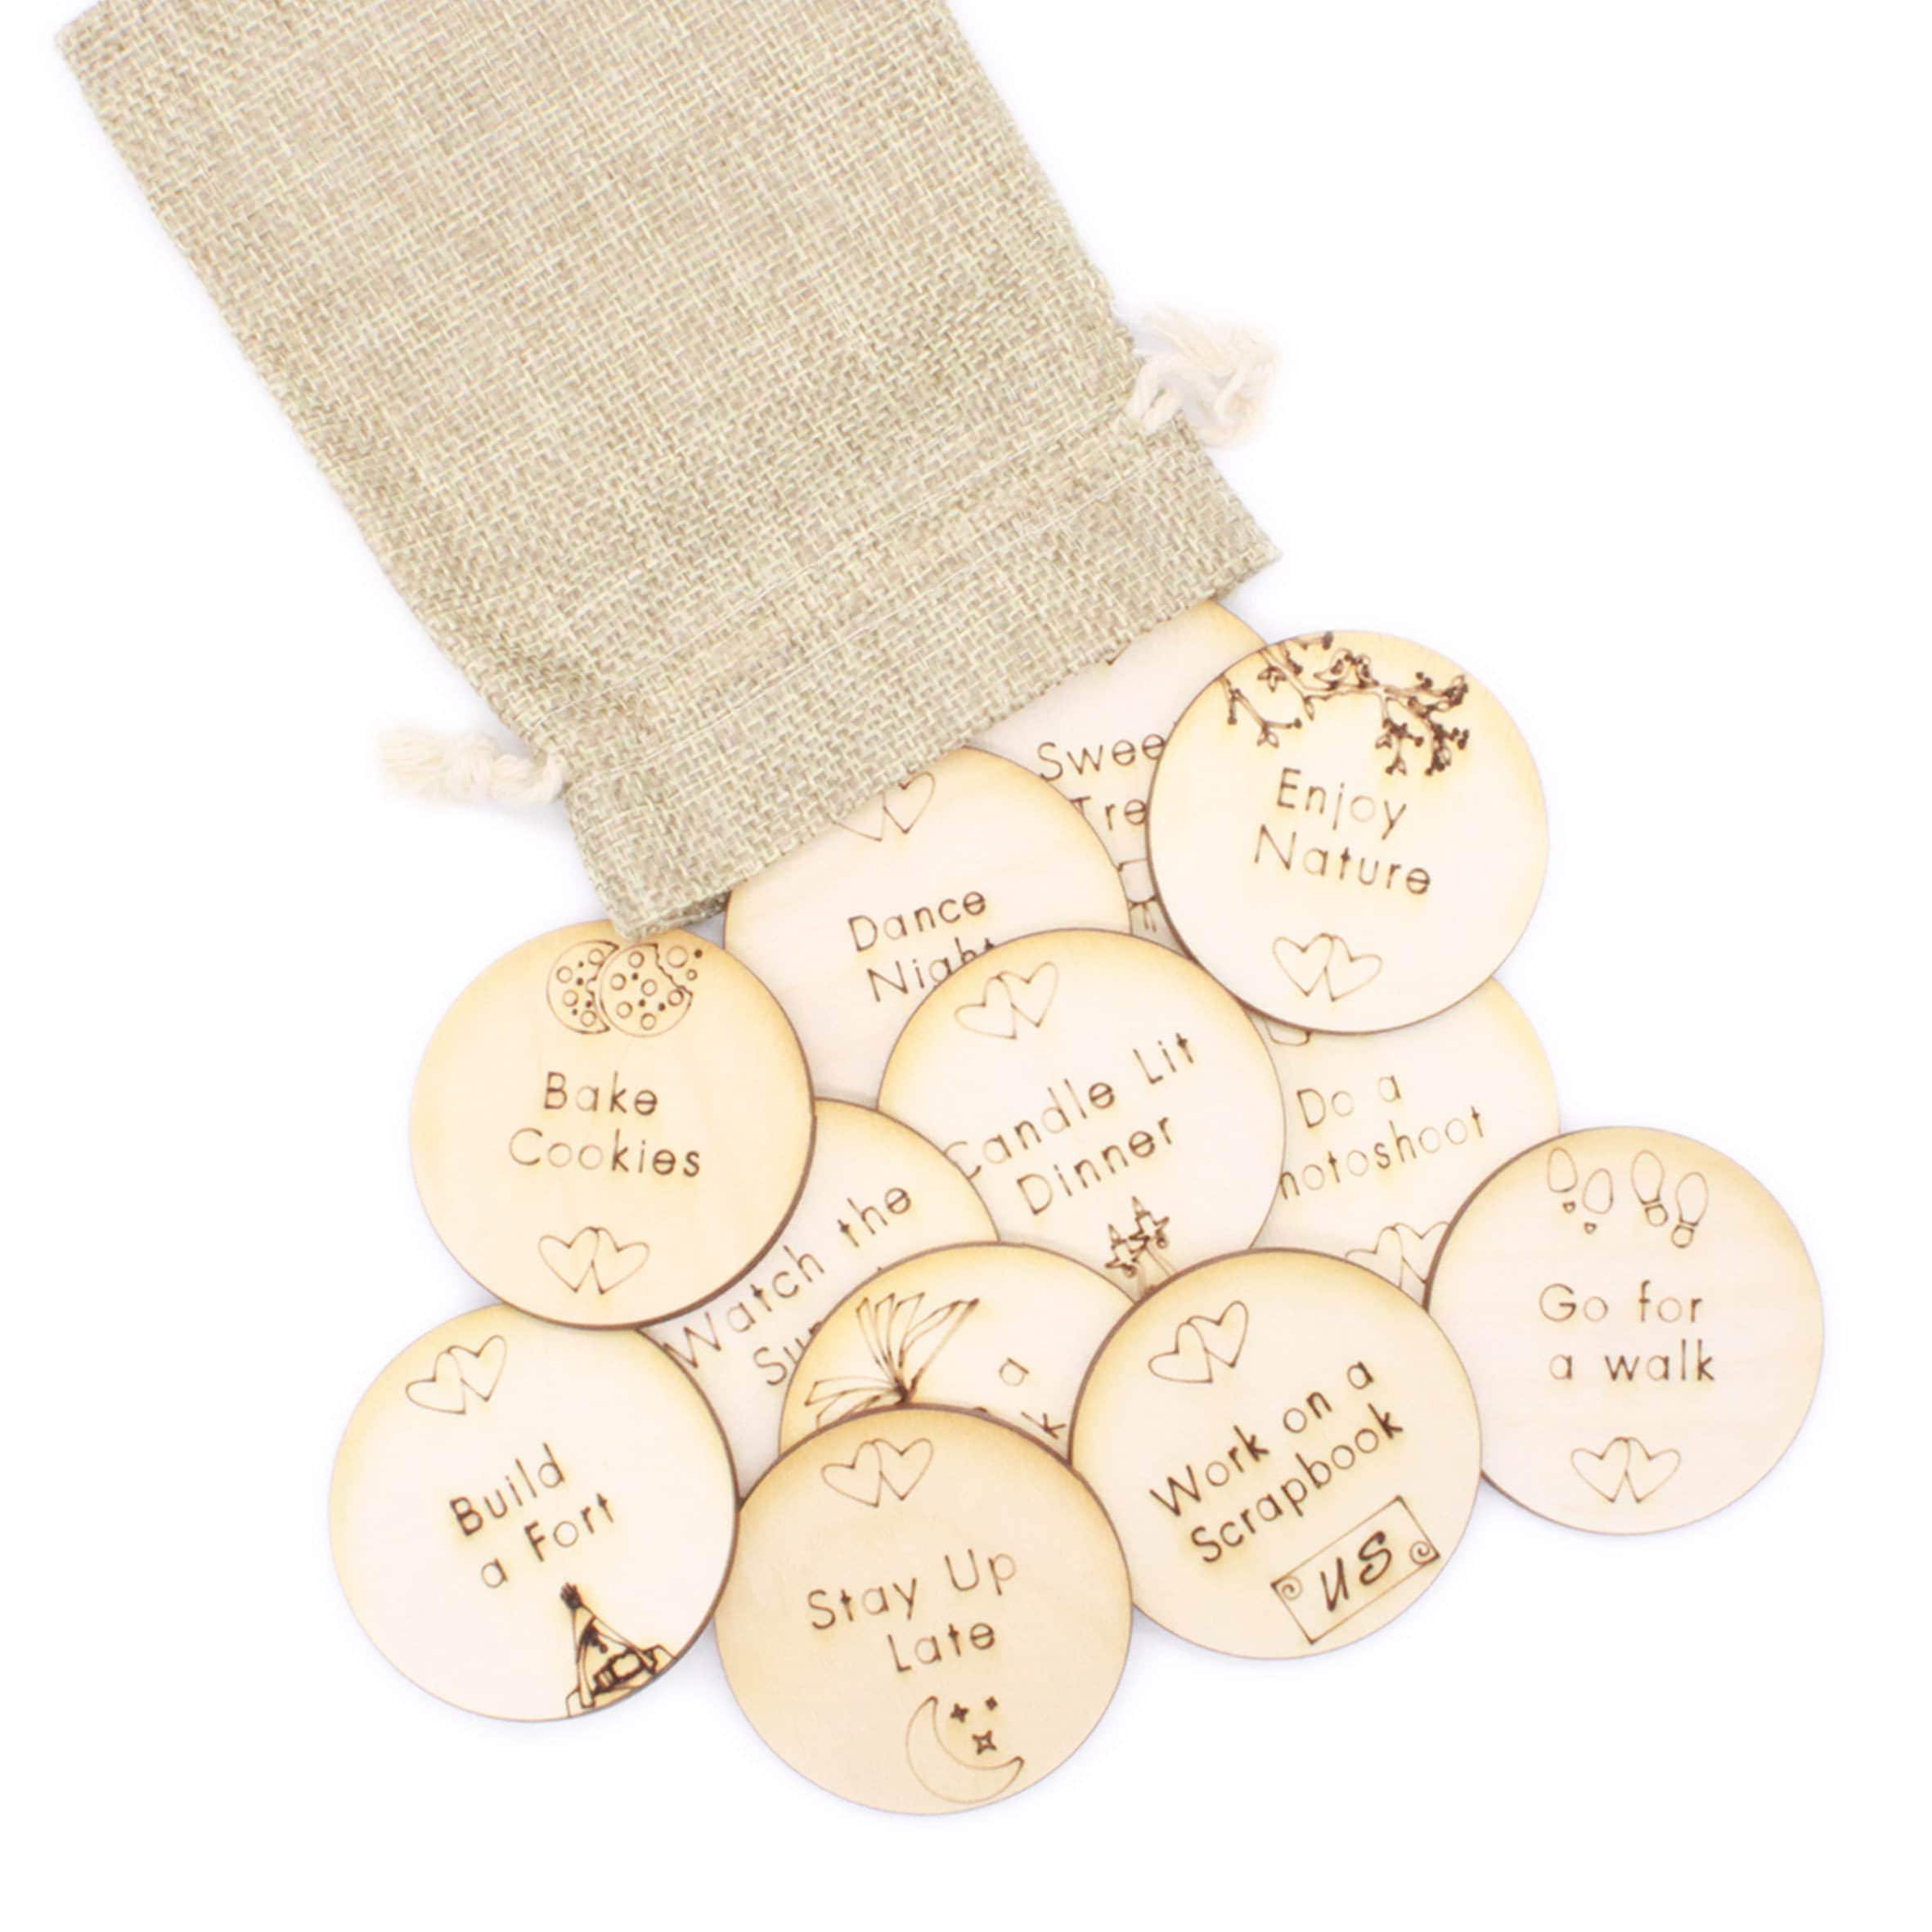 12 Date Night Tokens Laser Cut From 3mm Ply Wood